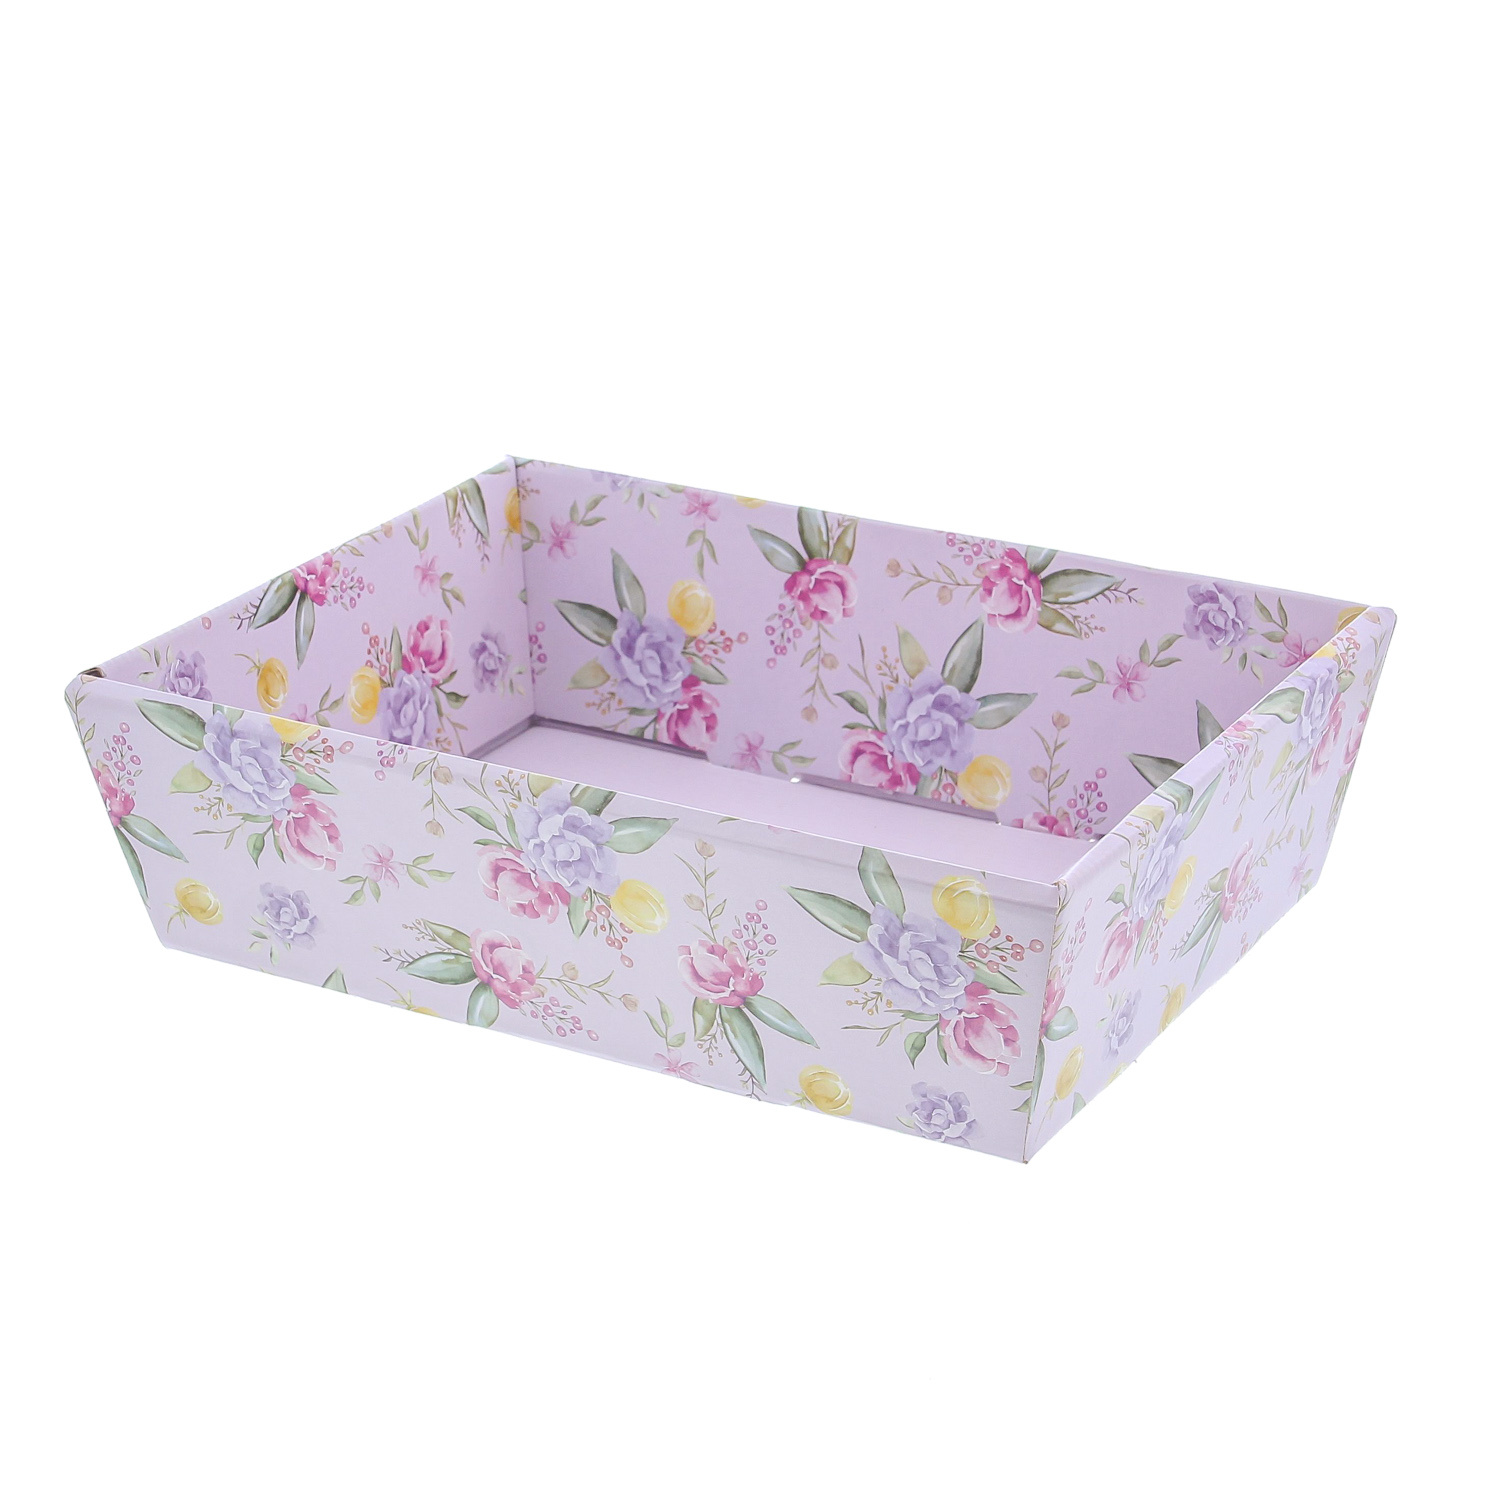 Basket "Flowers" lilac-pink - 210*90*290mm - 10 pieces